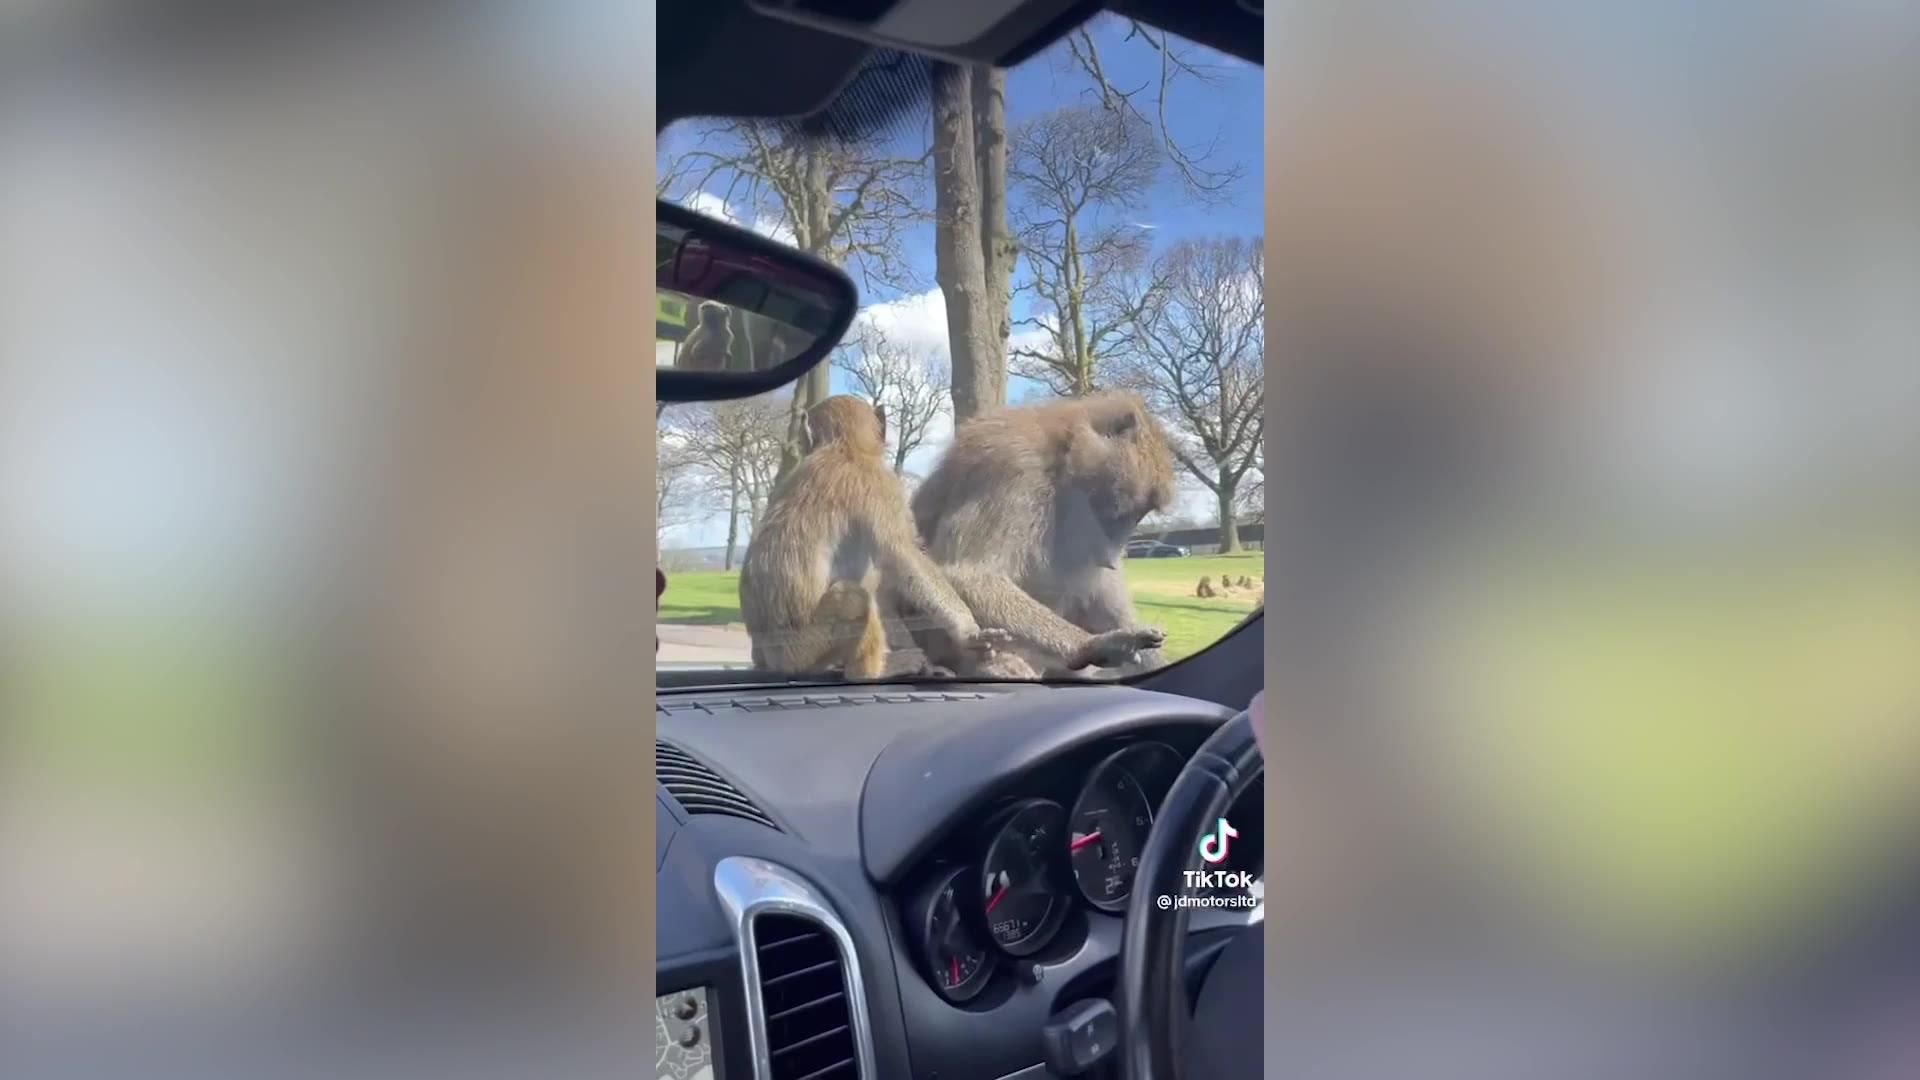 Baboon Animals Porn - Baboons trash angry dads' Porsche during safari park drive | indy100